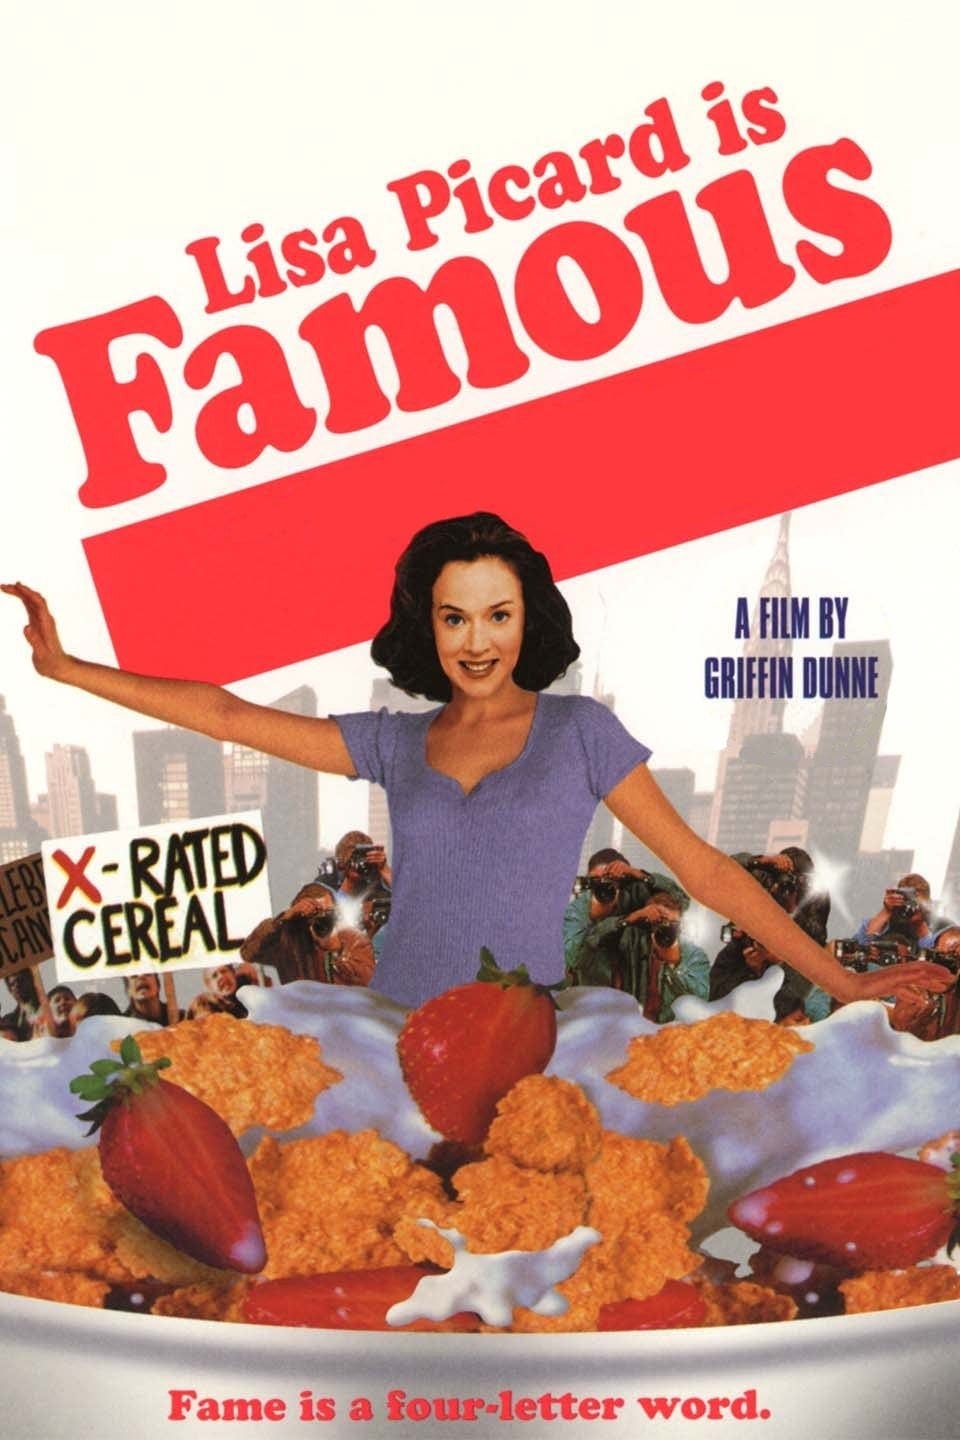 Lisa Picard Is Famous (2000) | Poster